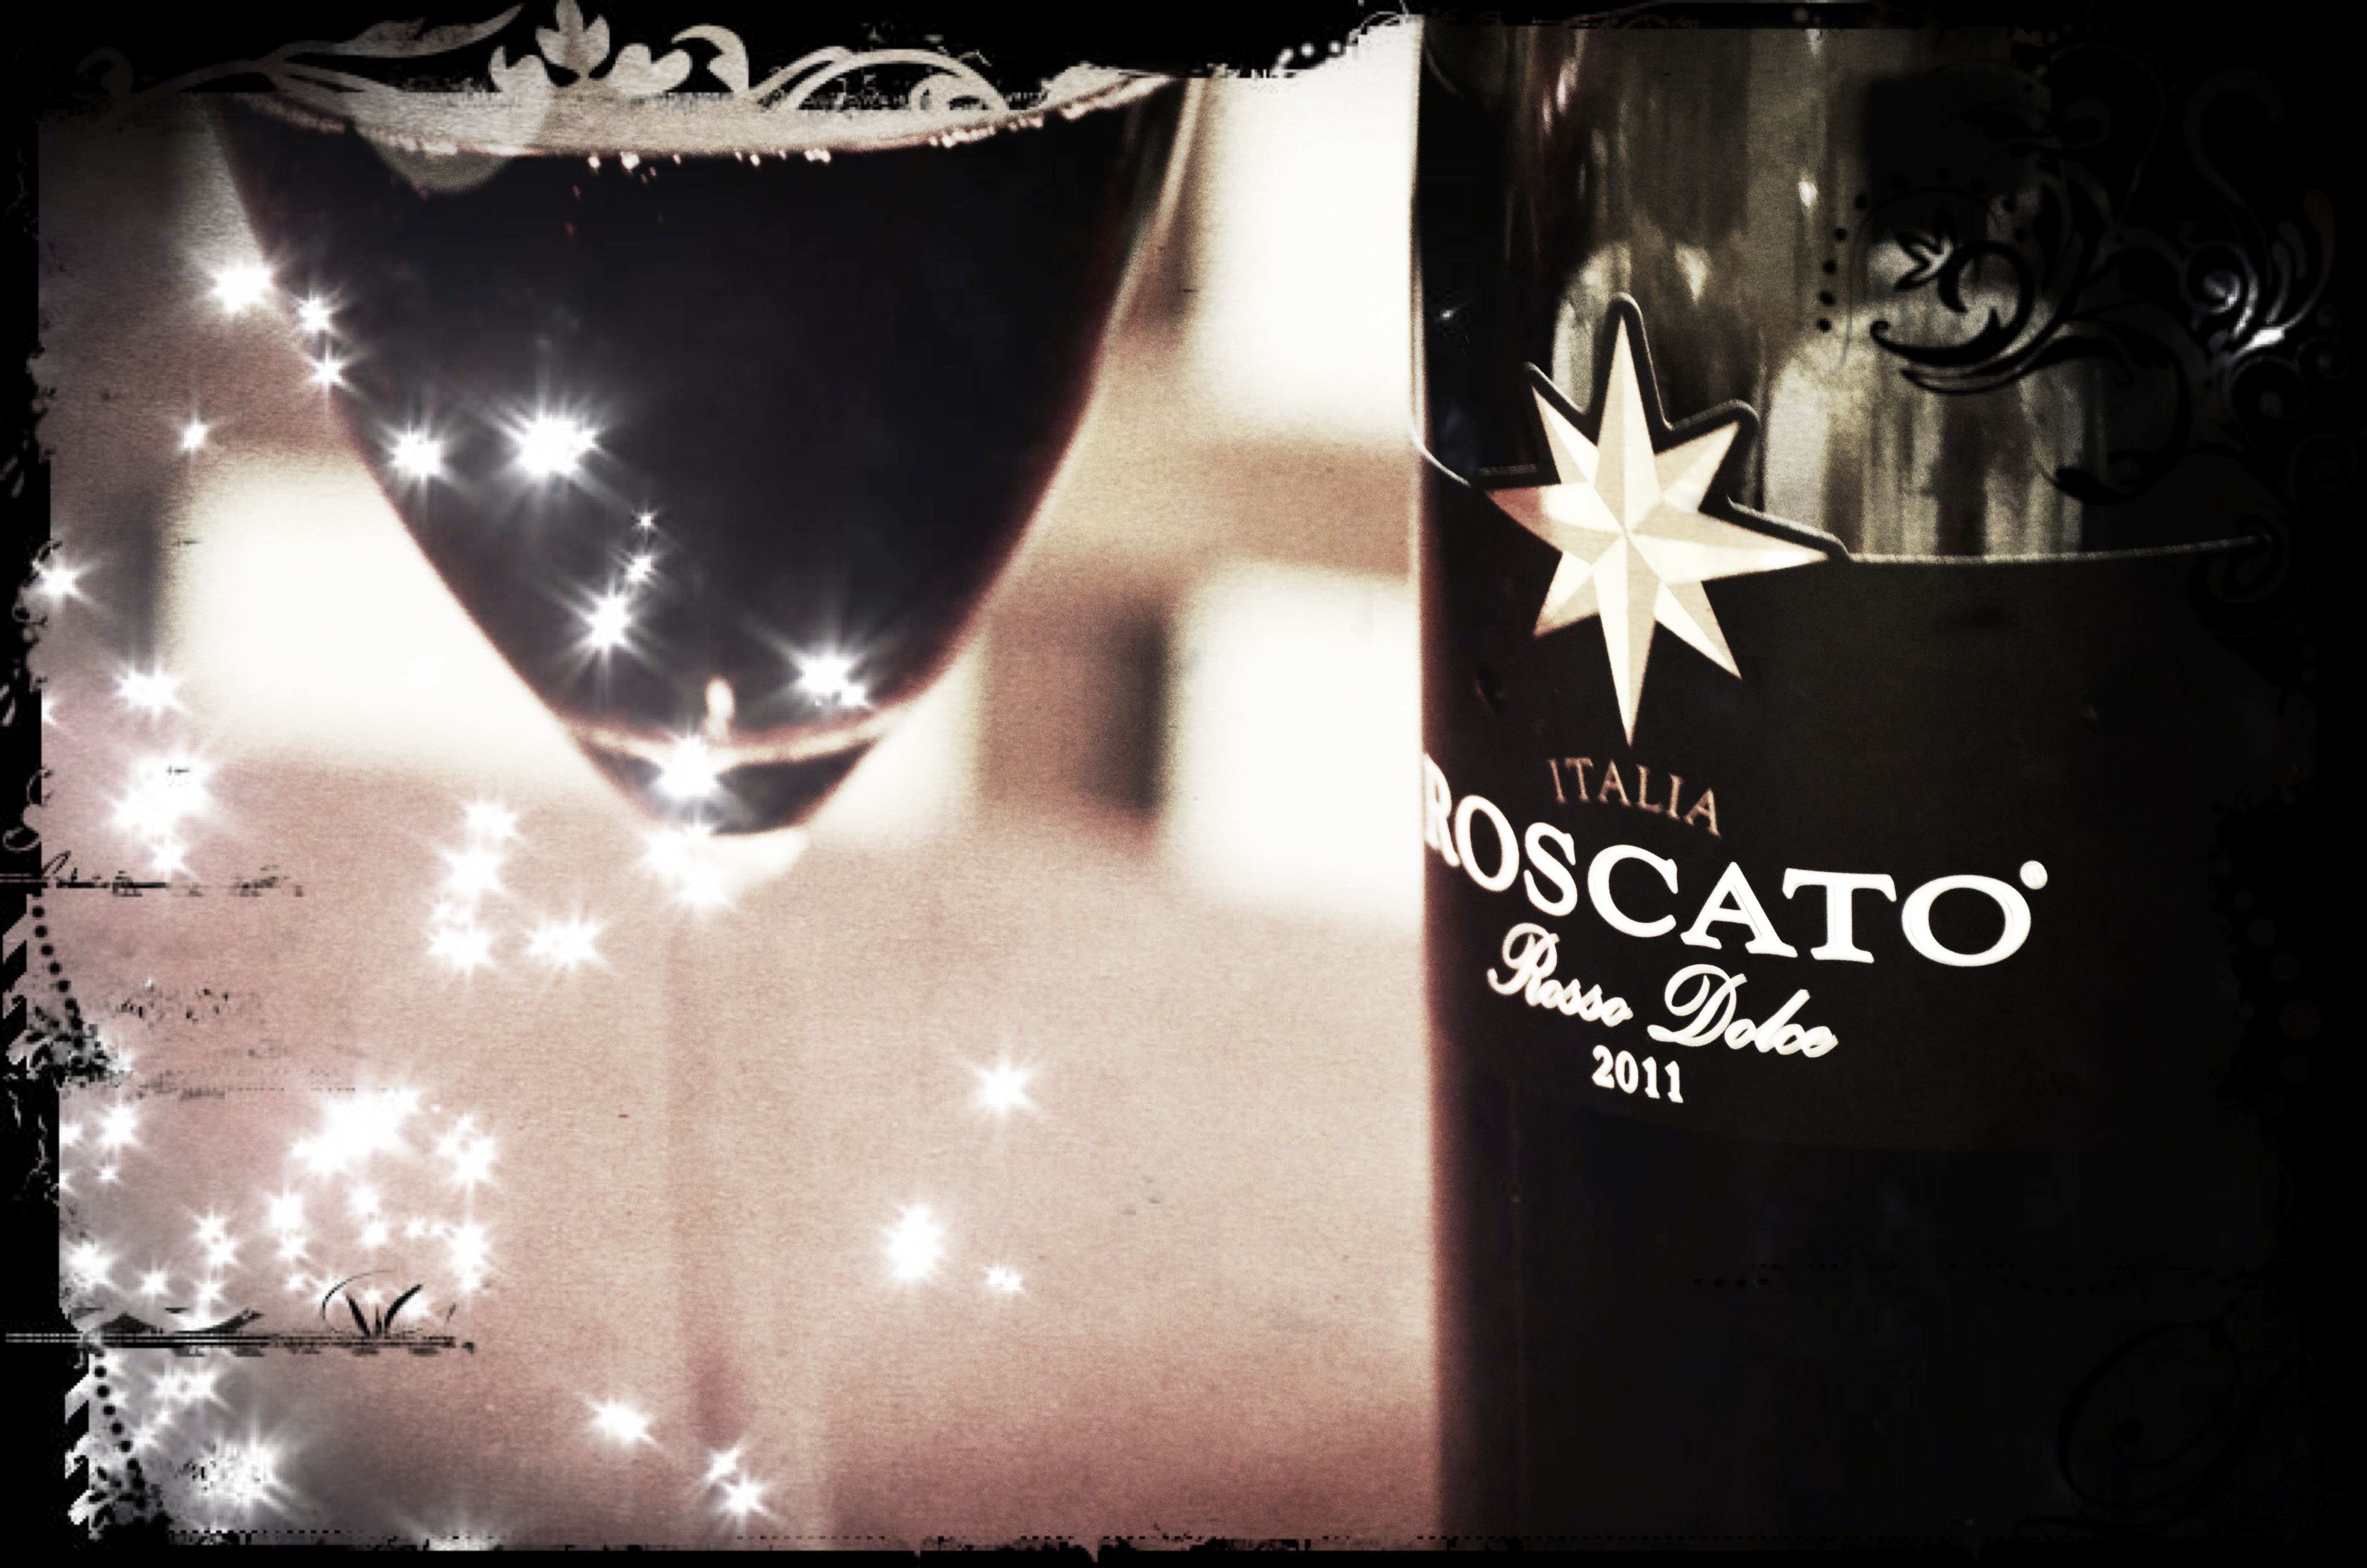 First Wine Roscato Rosso Dolce Happiness Is